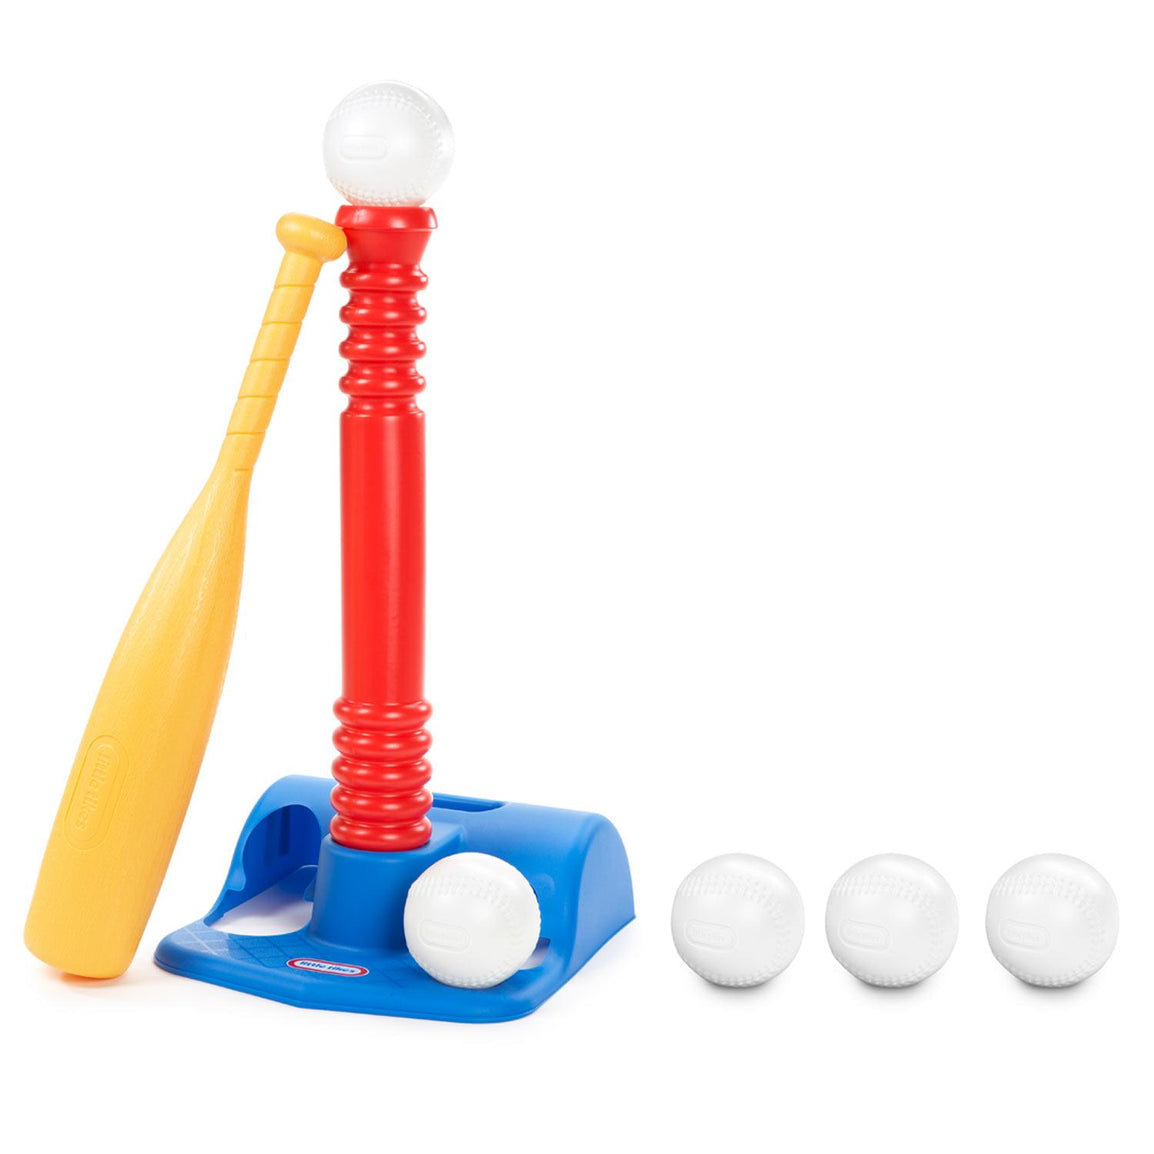 TotSports T-Ball Set with 5 Balls - Official Little Tikes Website